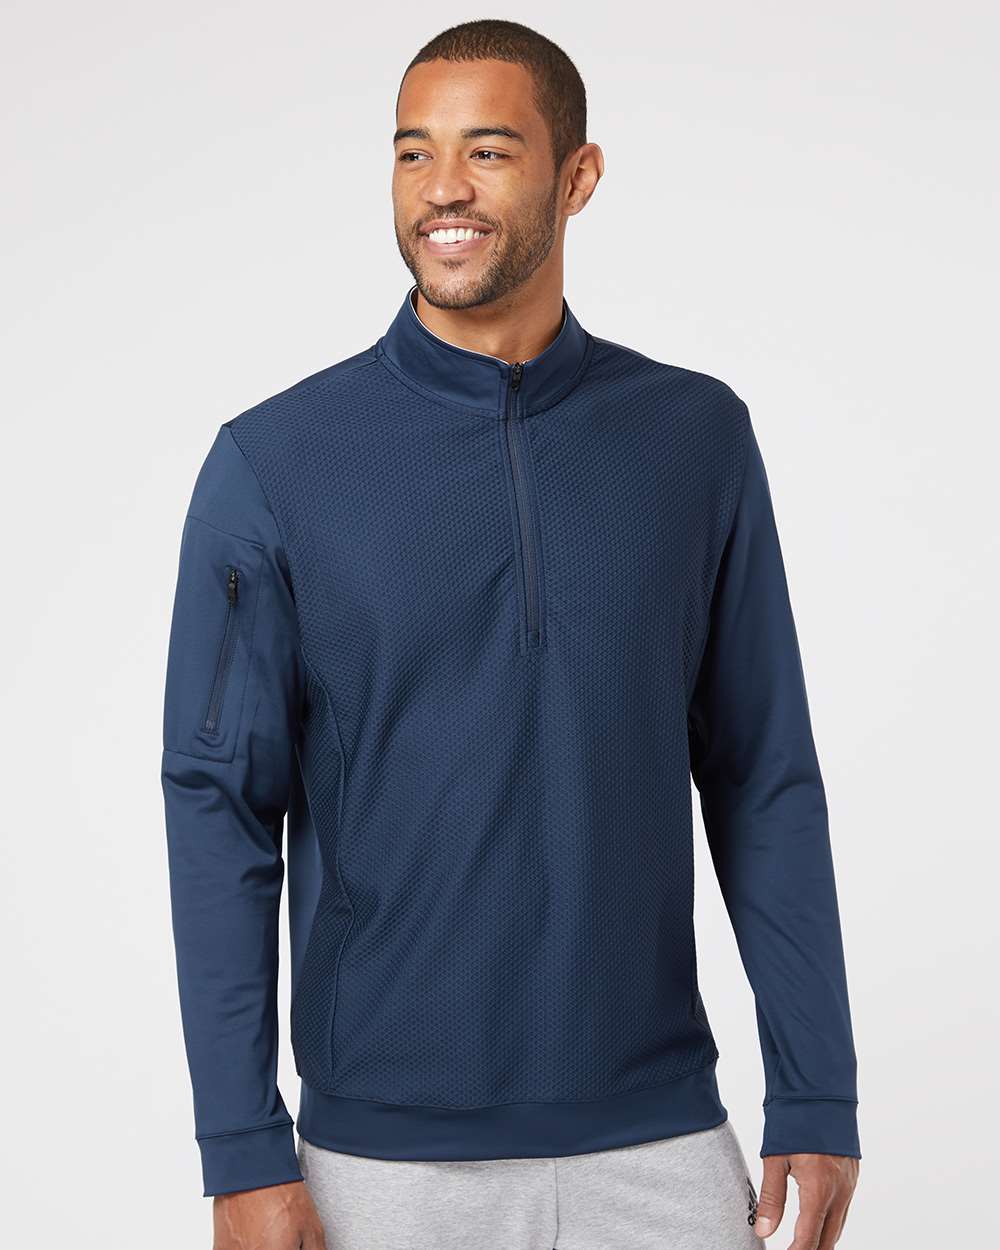 Adidas Performance Textured Quarter-Zip Pullover A295 #colormdl_Collegiate Navy